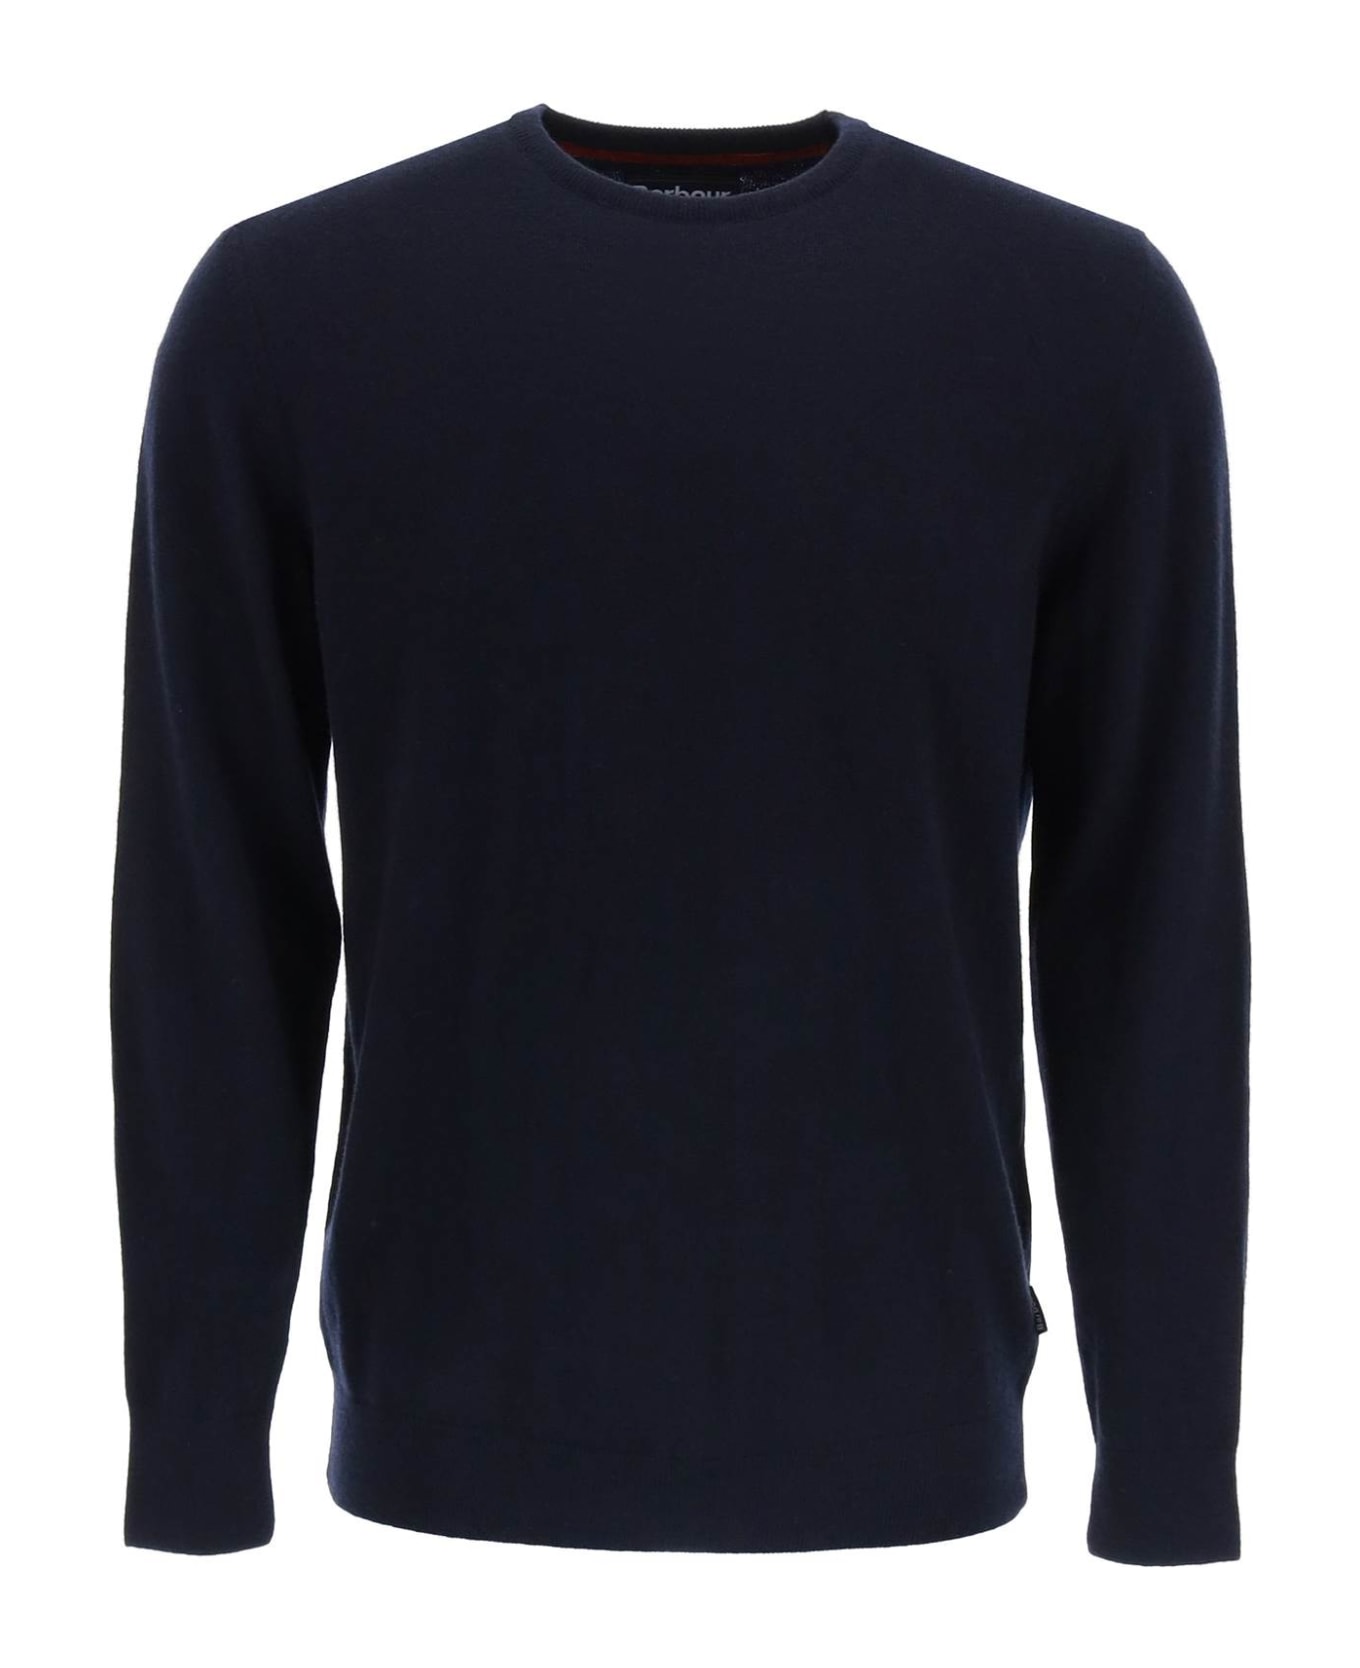 Barbour 'harrow' Wool And Cashmere Sweater - DARK NAVY (Blue)